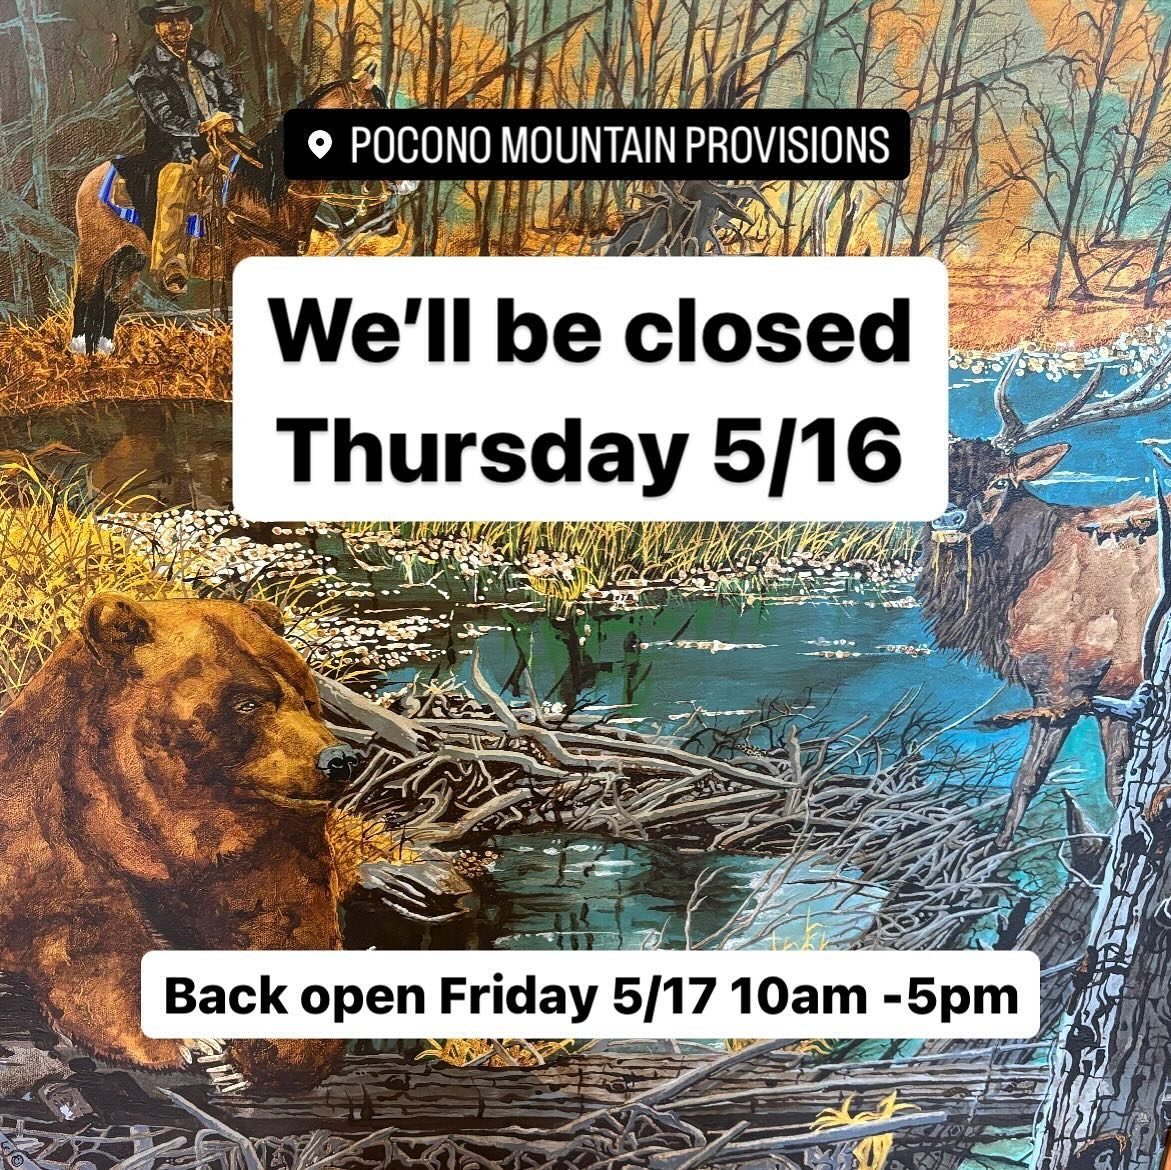 We&rsquo;ll be closed on Thursday, 5/16 but back to our normal hours on Friday! Come stop by the shop this weekend. 

Friday + Saturday 10am-5pm
Sunday 10am-3pm

www.poconomountainprovisions.com

990 Route 940 in Pocono Lake